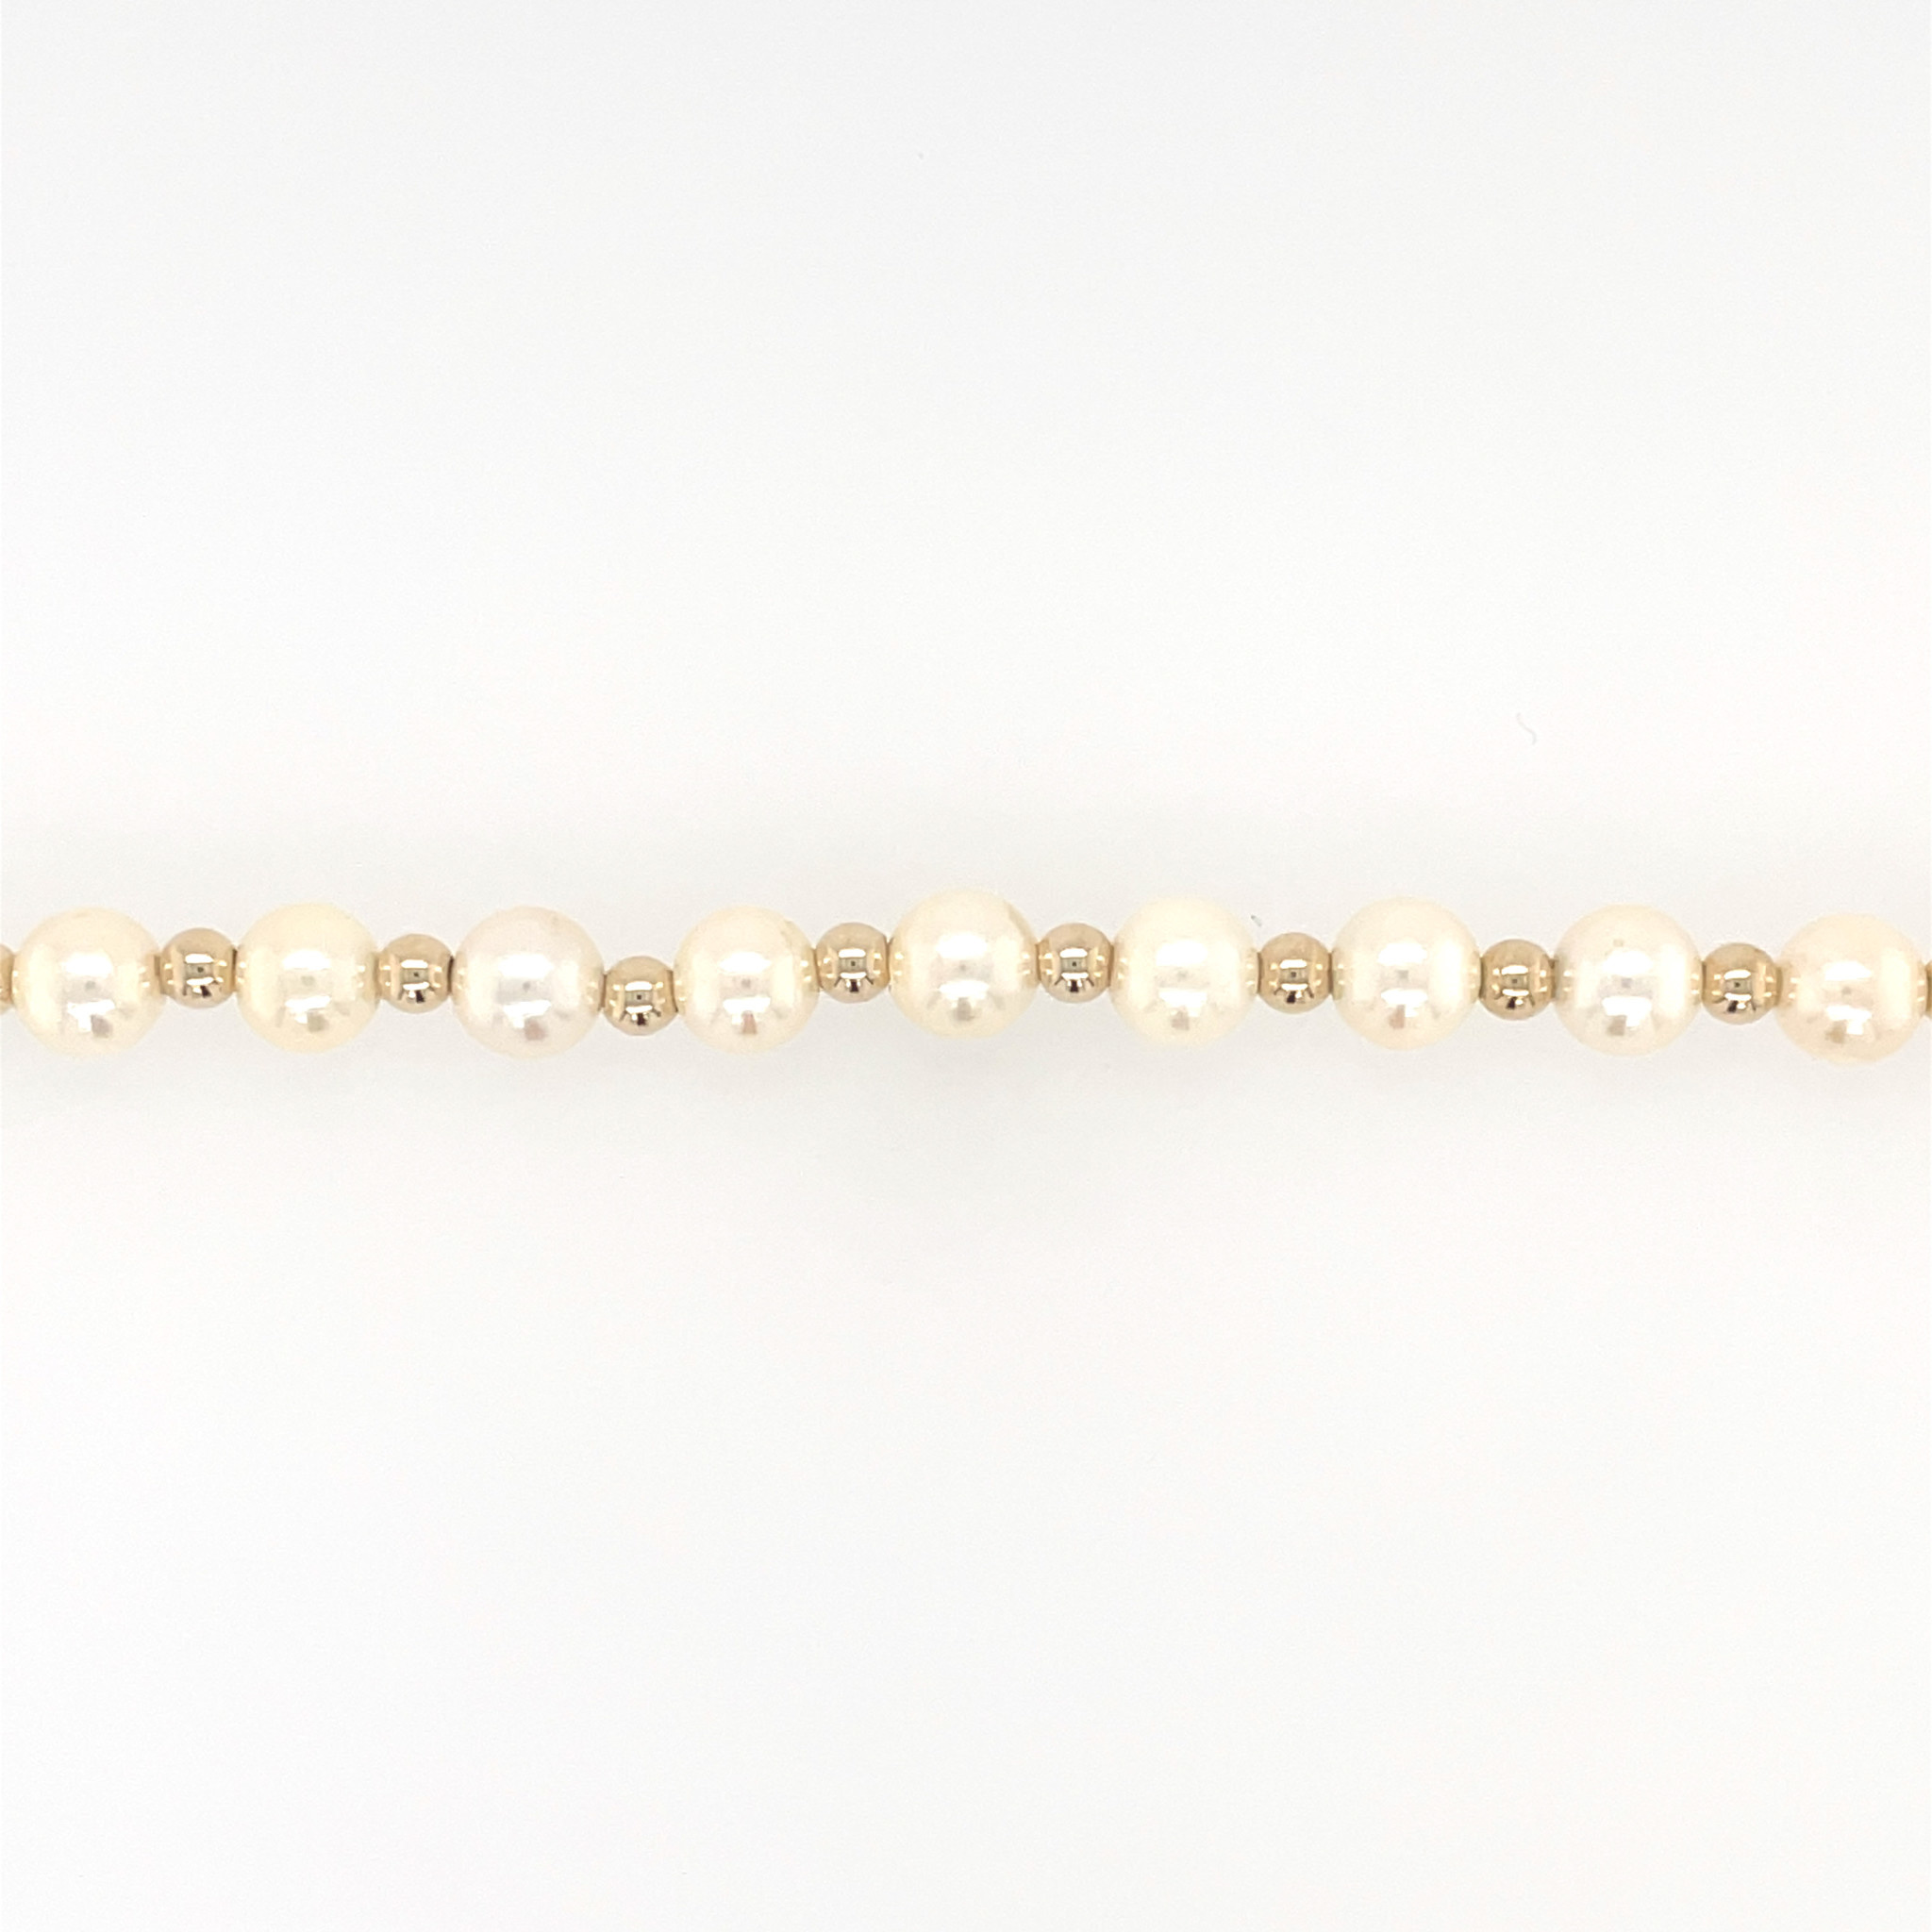 20075 14K YELLOW GOLD BEADS AND PEARLS BRACELET